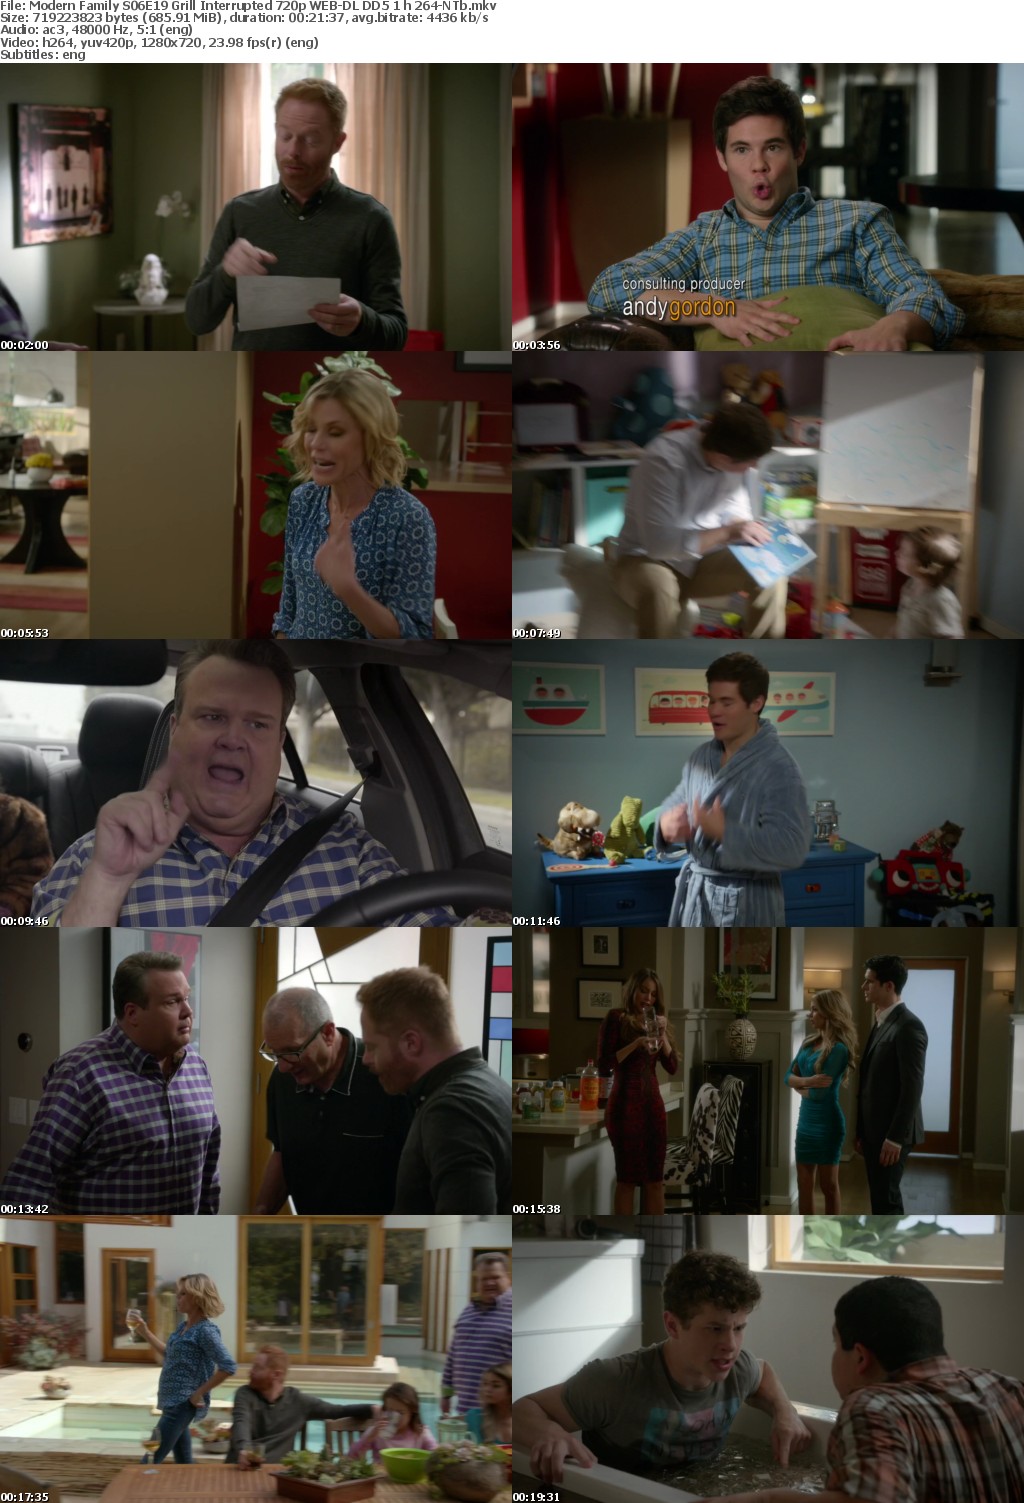 Modern Family S06E19 Grill Interrupted 720p WEB-DL DD5 1 h 264-NTb